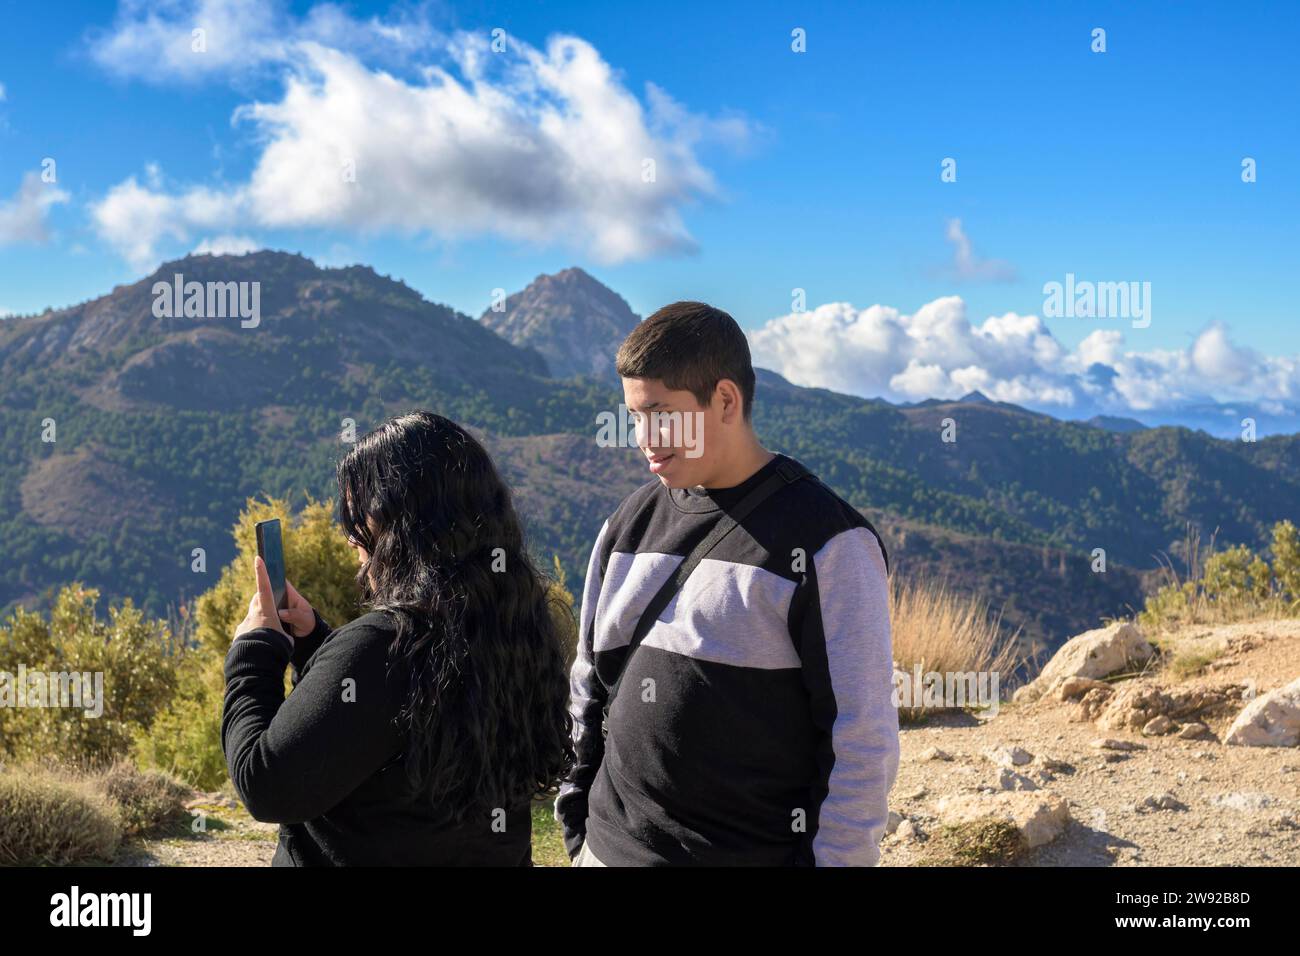 Latin guys, taking smart phone pictures of the mountains in sierra nevada, granada, spain Stock Photo